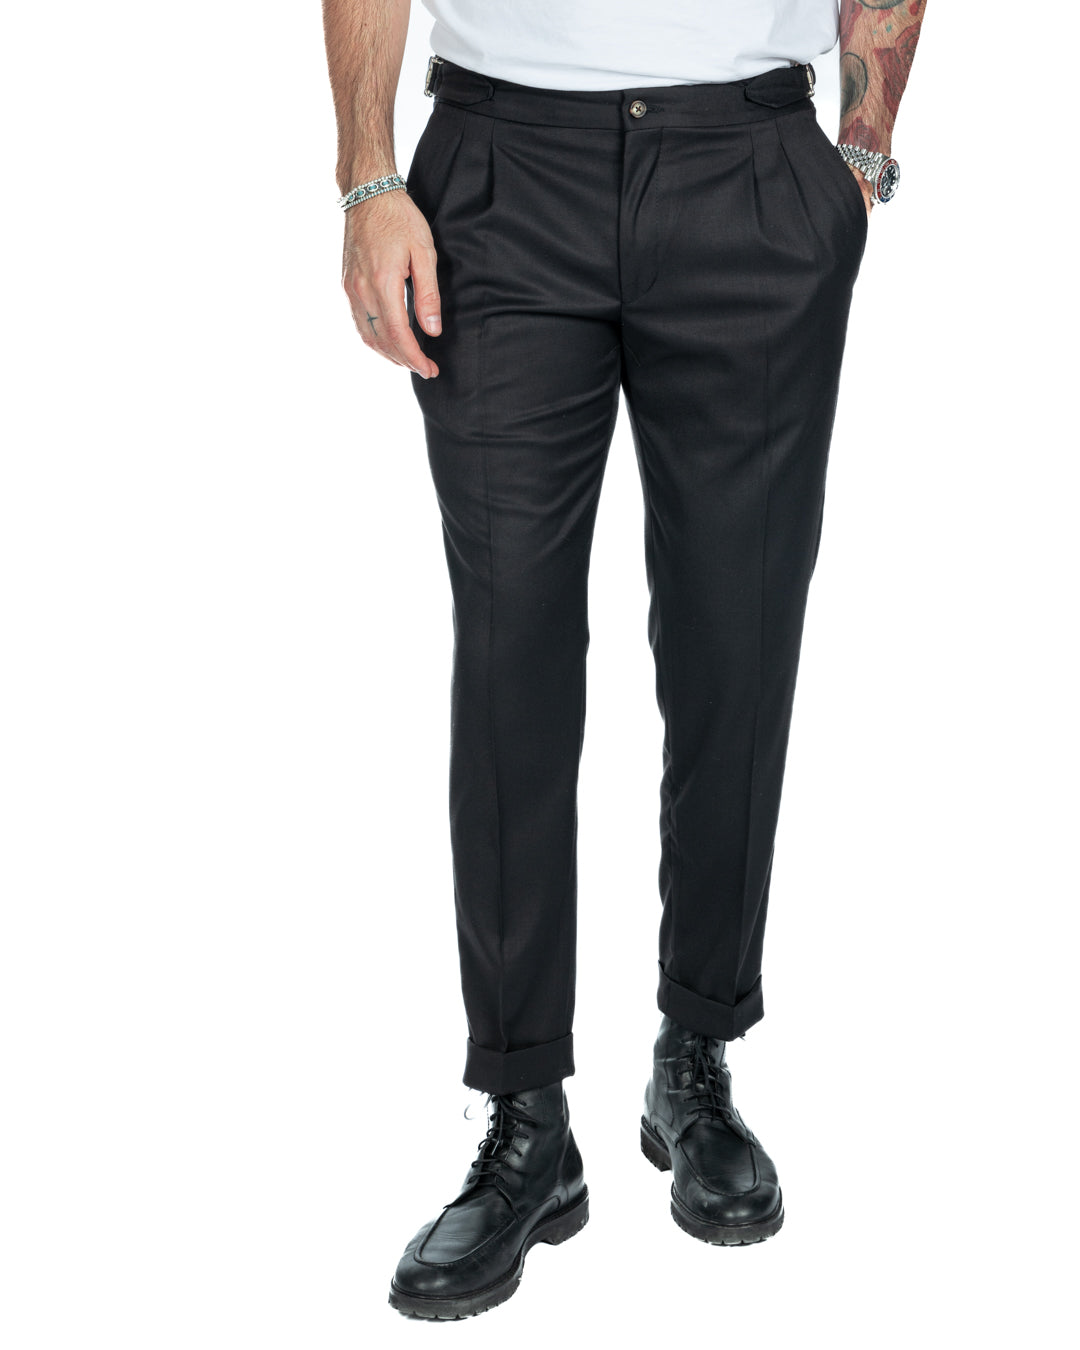 Otranto - black trousers with buckles and pleats